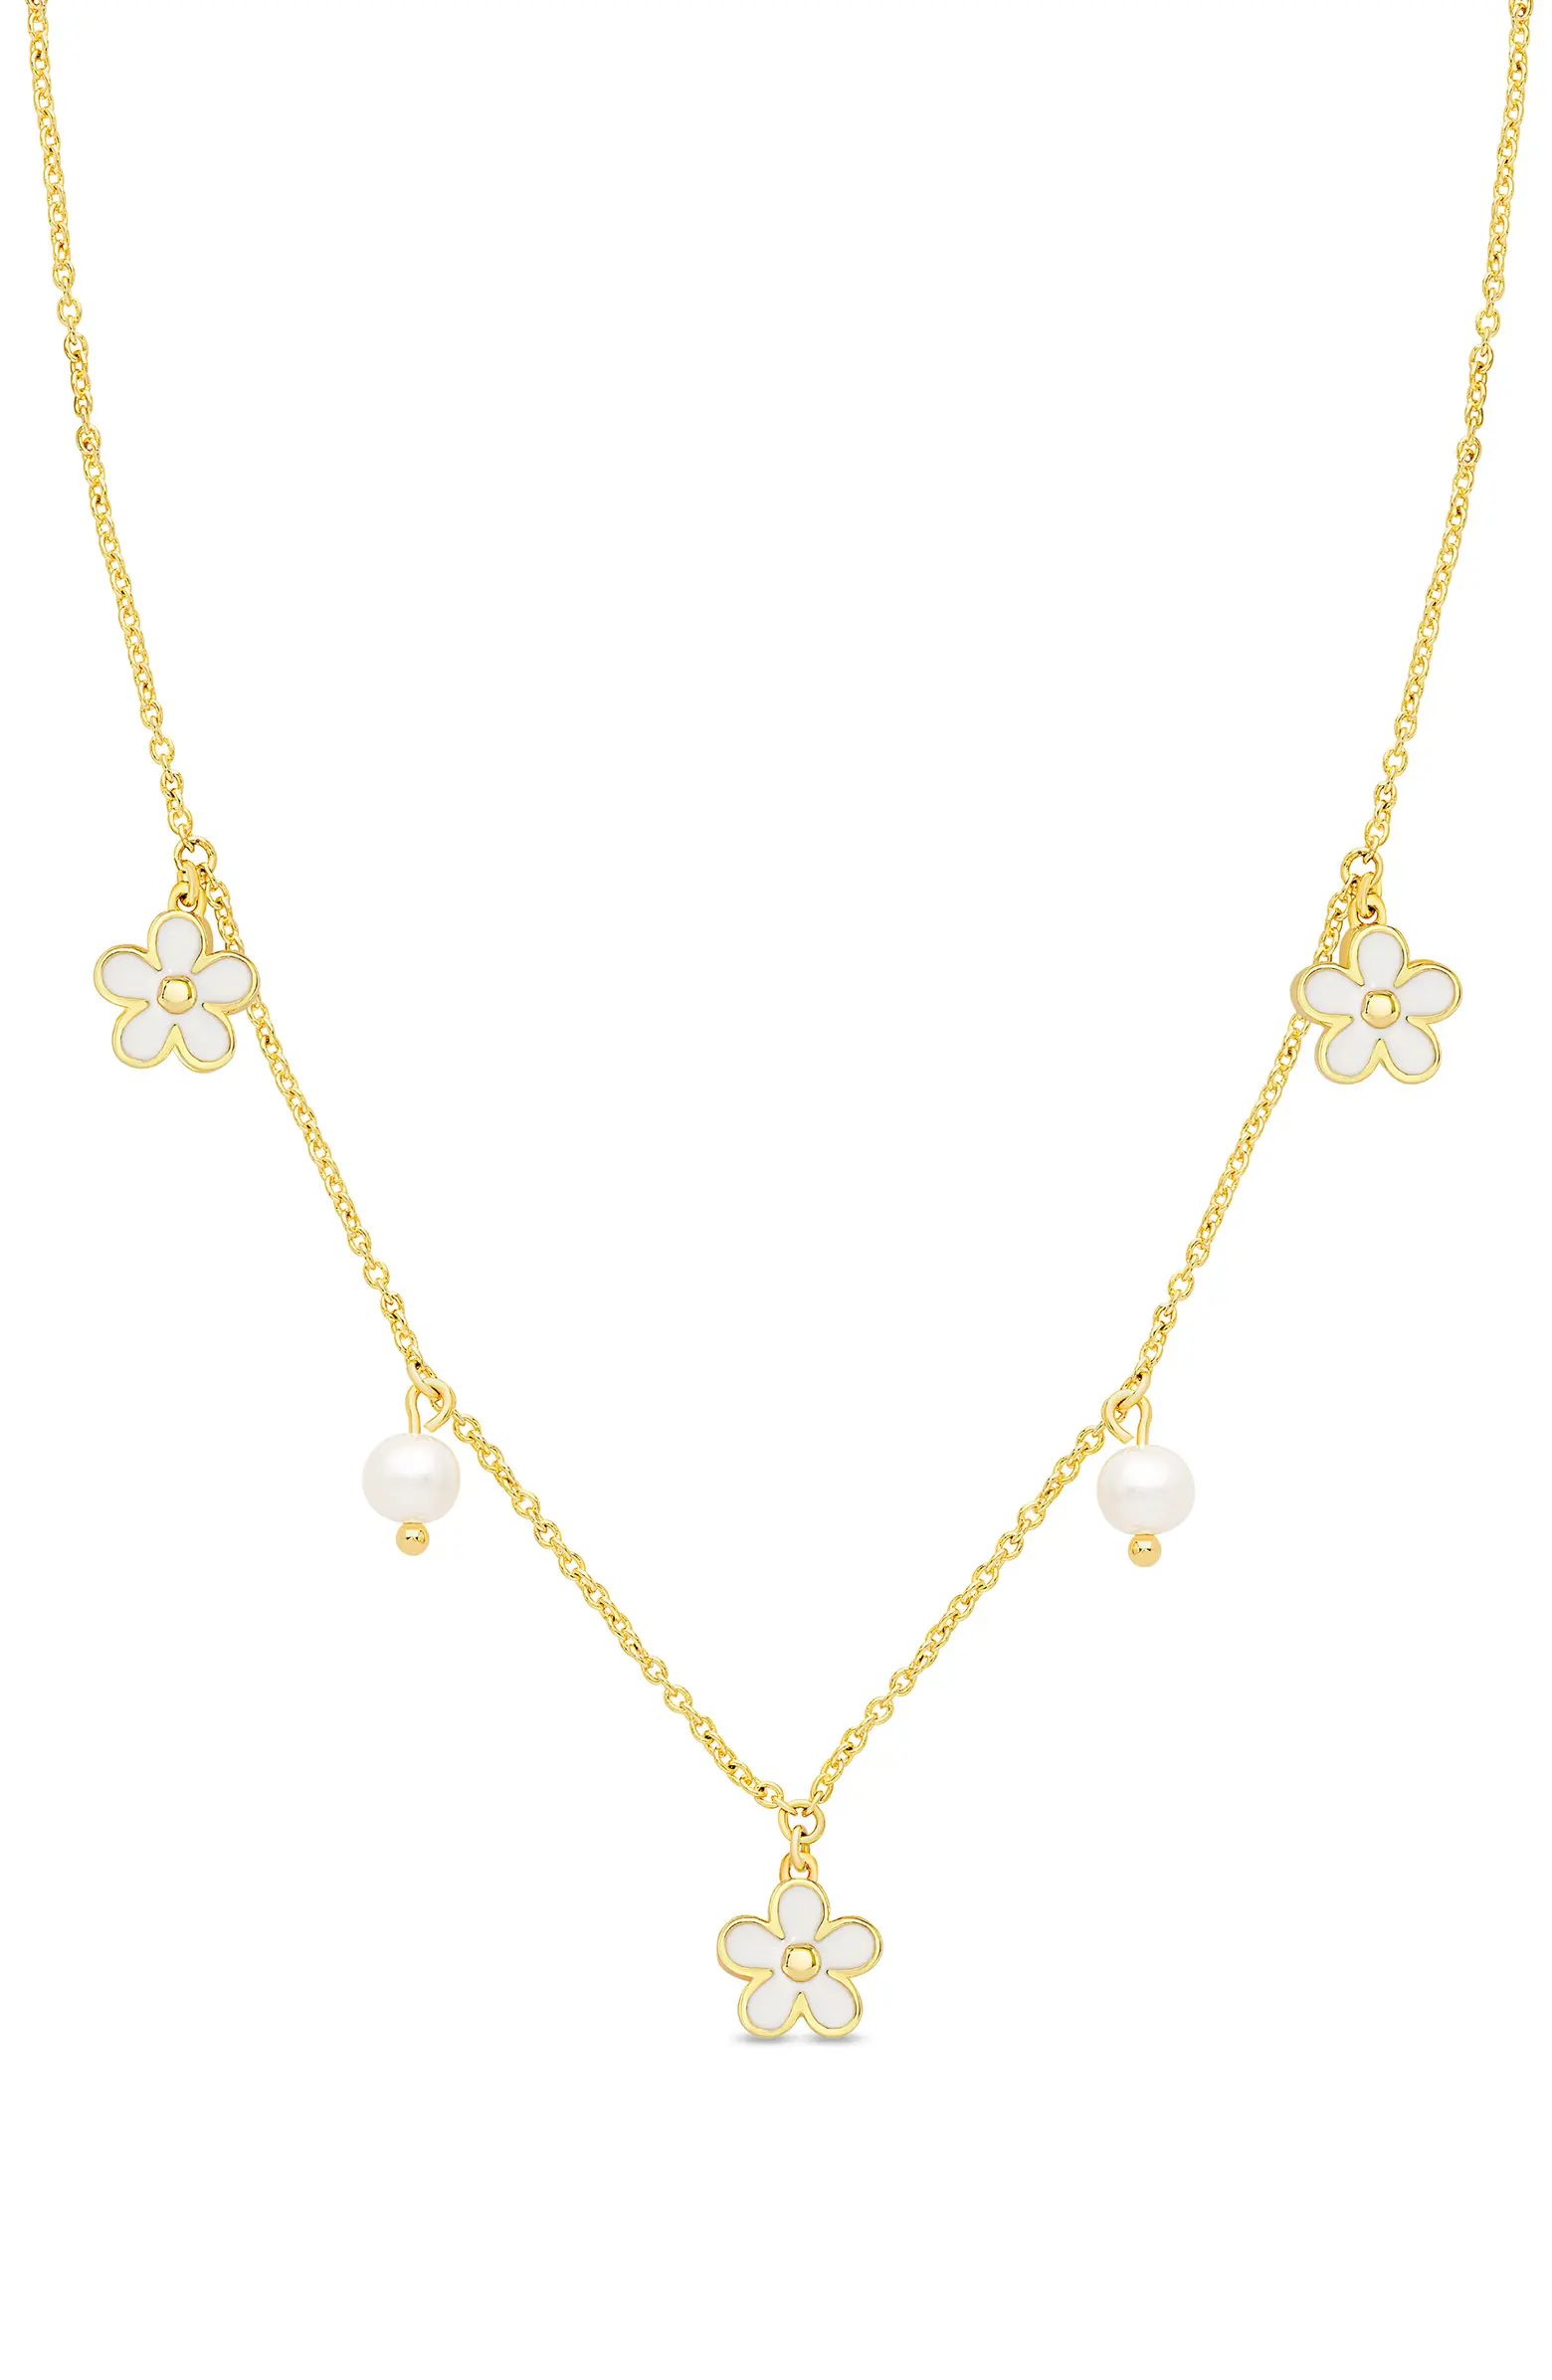 Lily Nily Flower & Pearl Charm Necklace | Nordstrom | Nordstrom